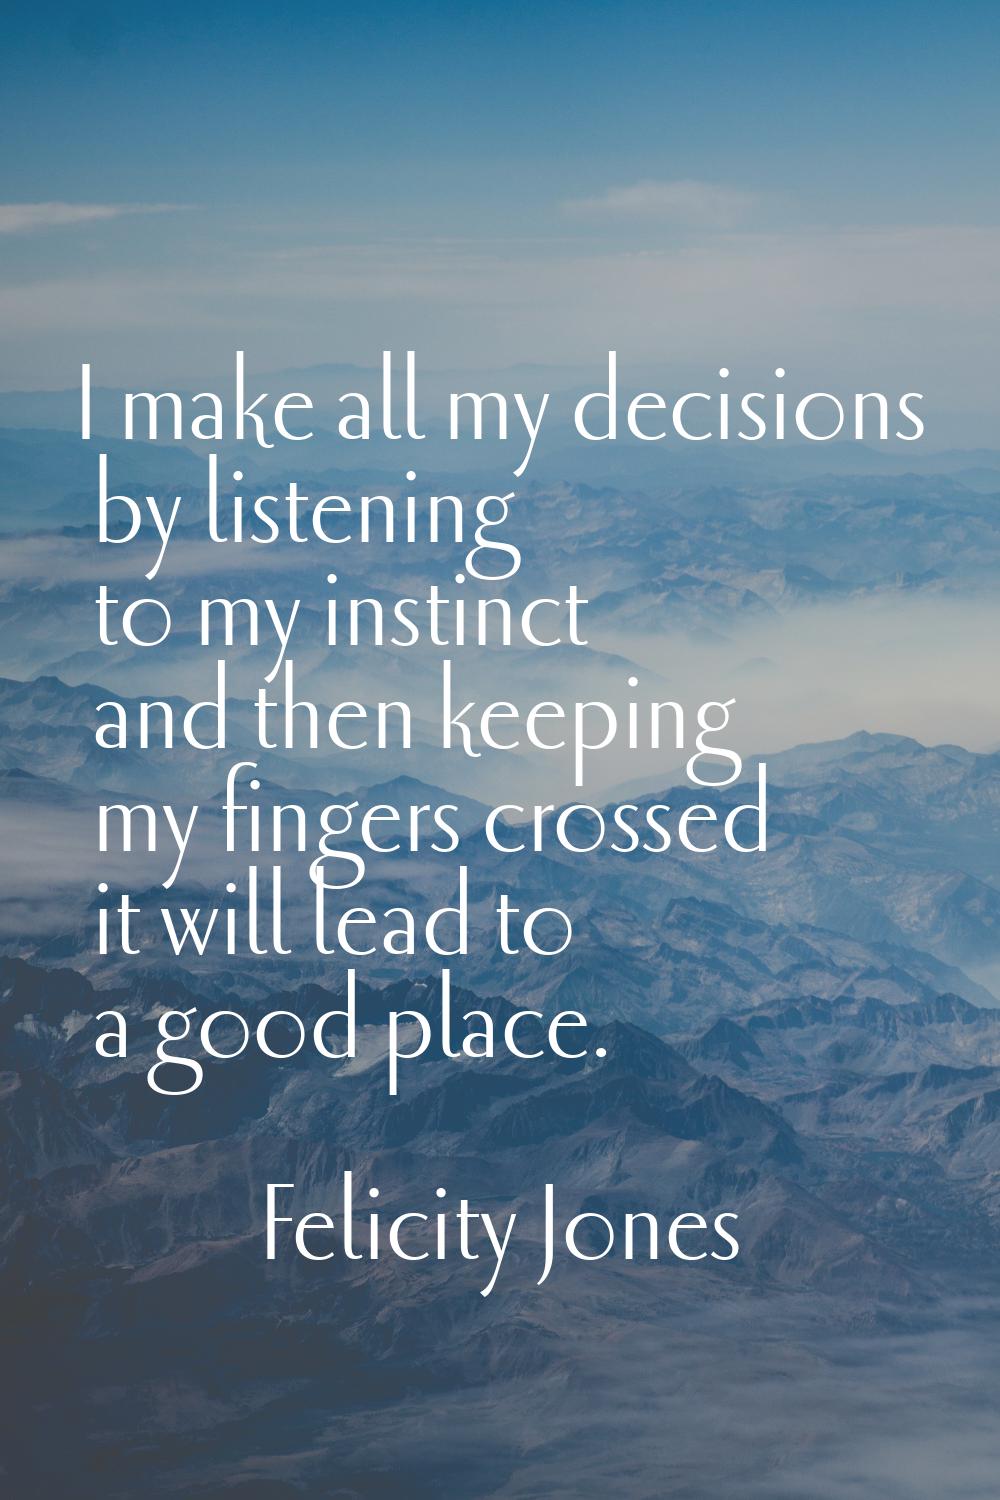 I make all my decisions by listening to my instinct and then keeping my fingers crossed it will lea